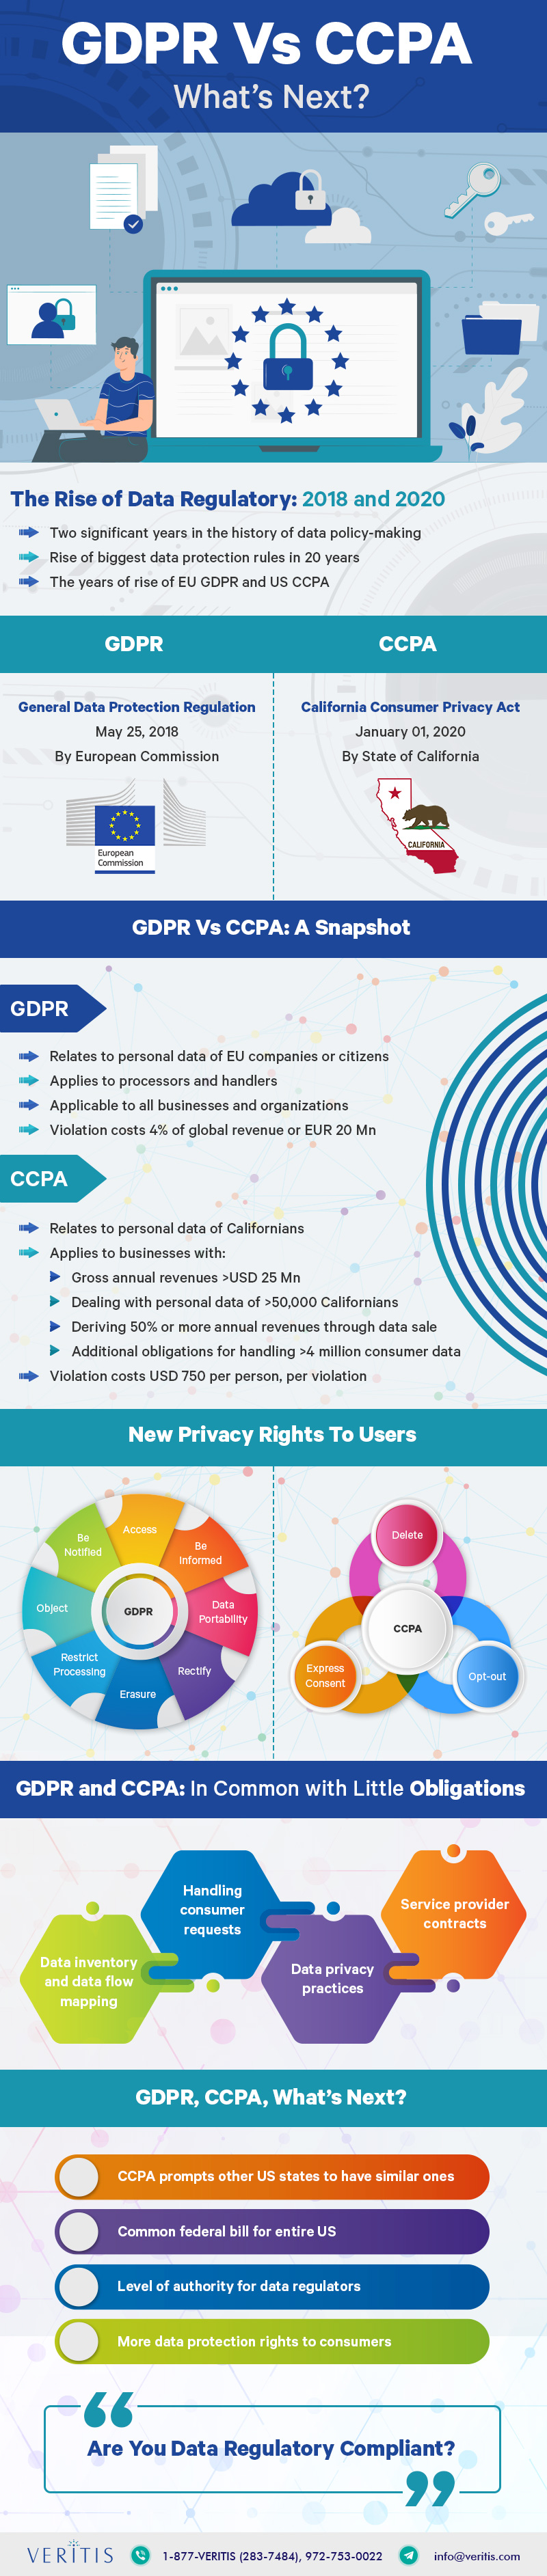 CCPA vs GDPR Compliance Guide [Infographic]